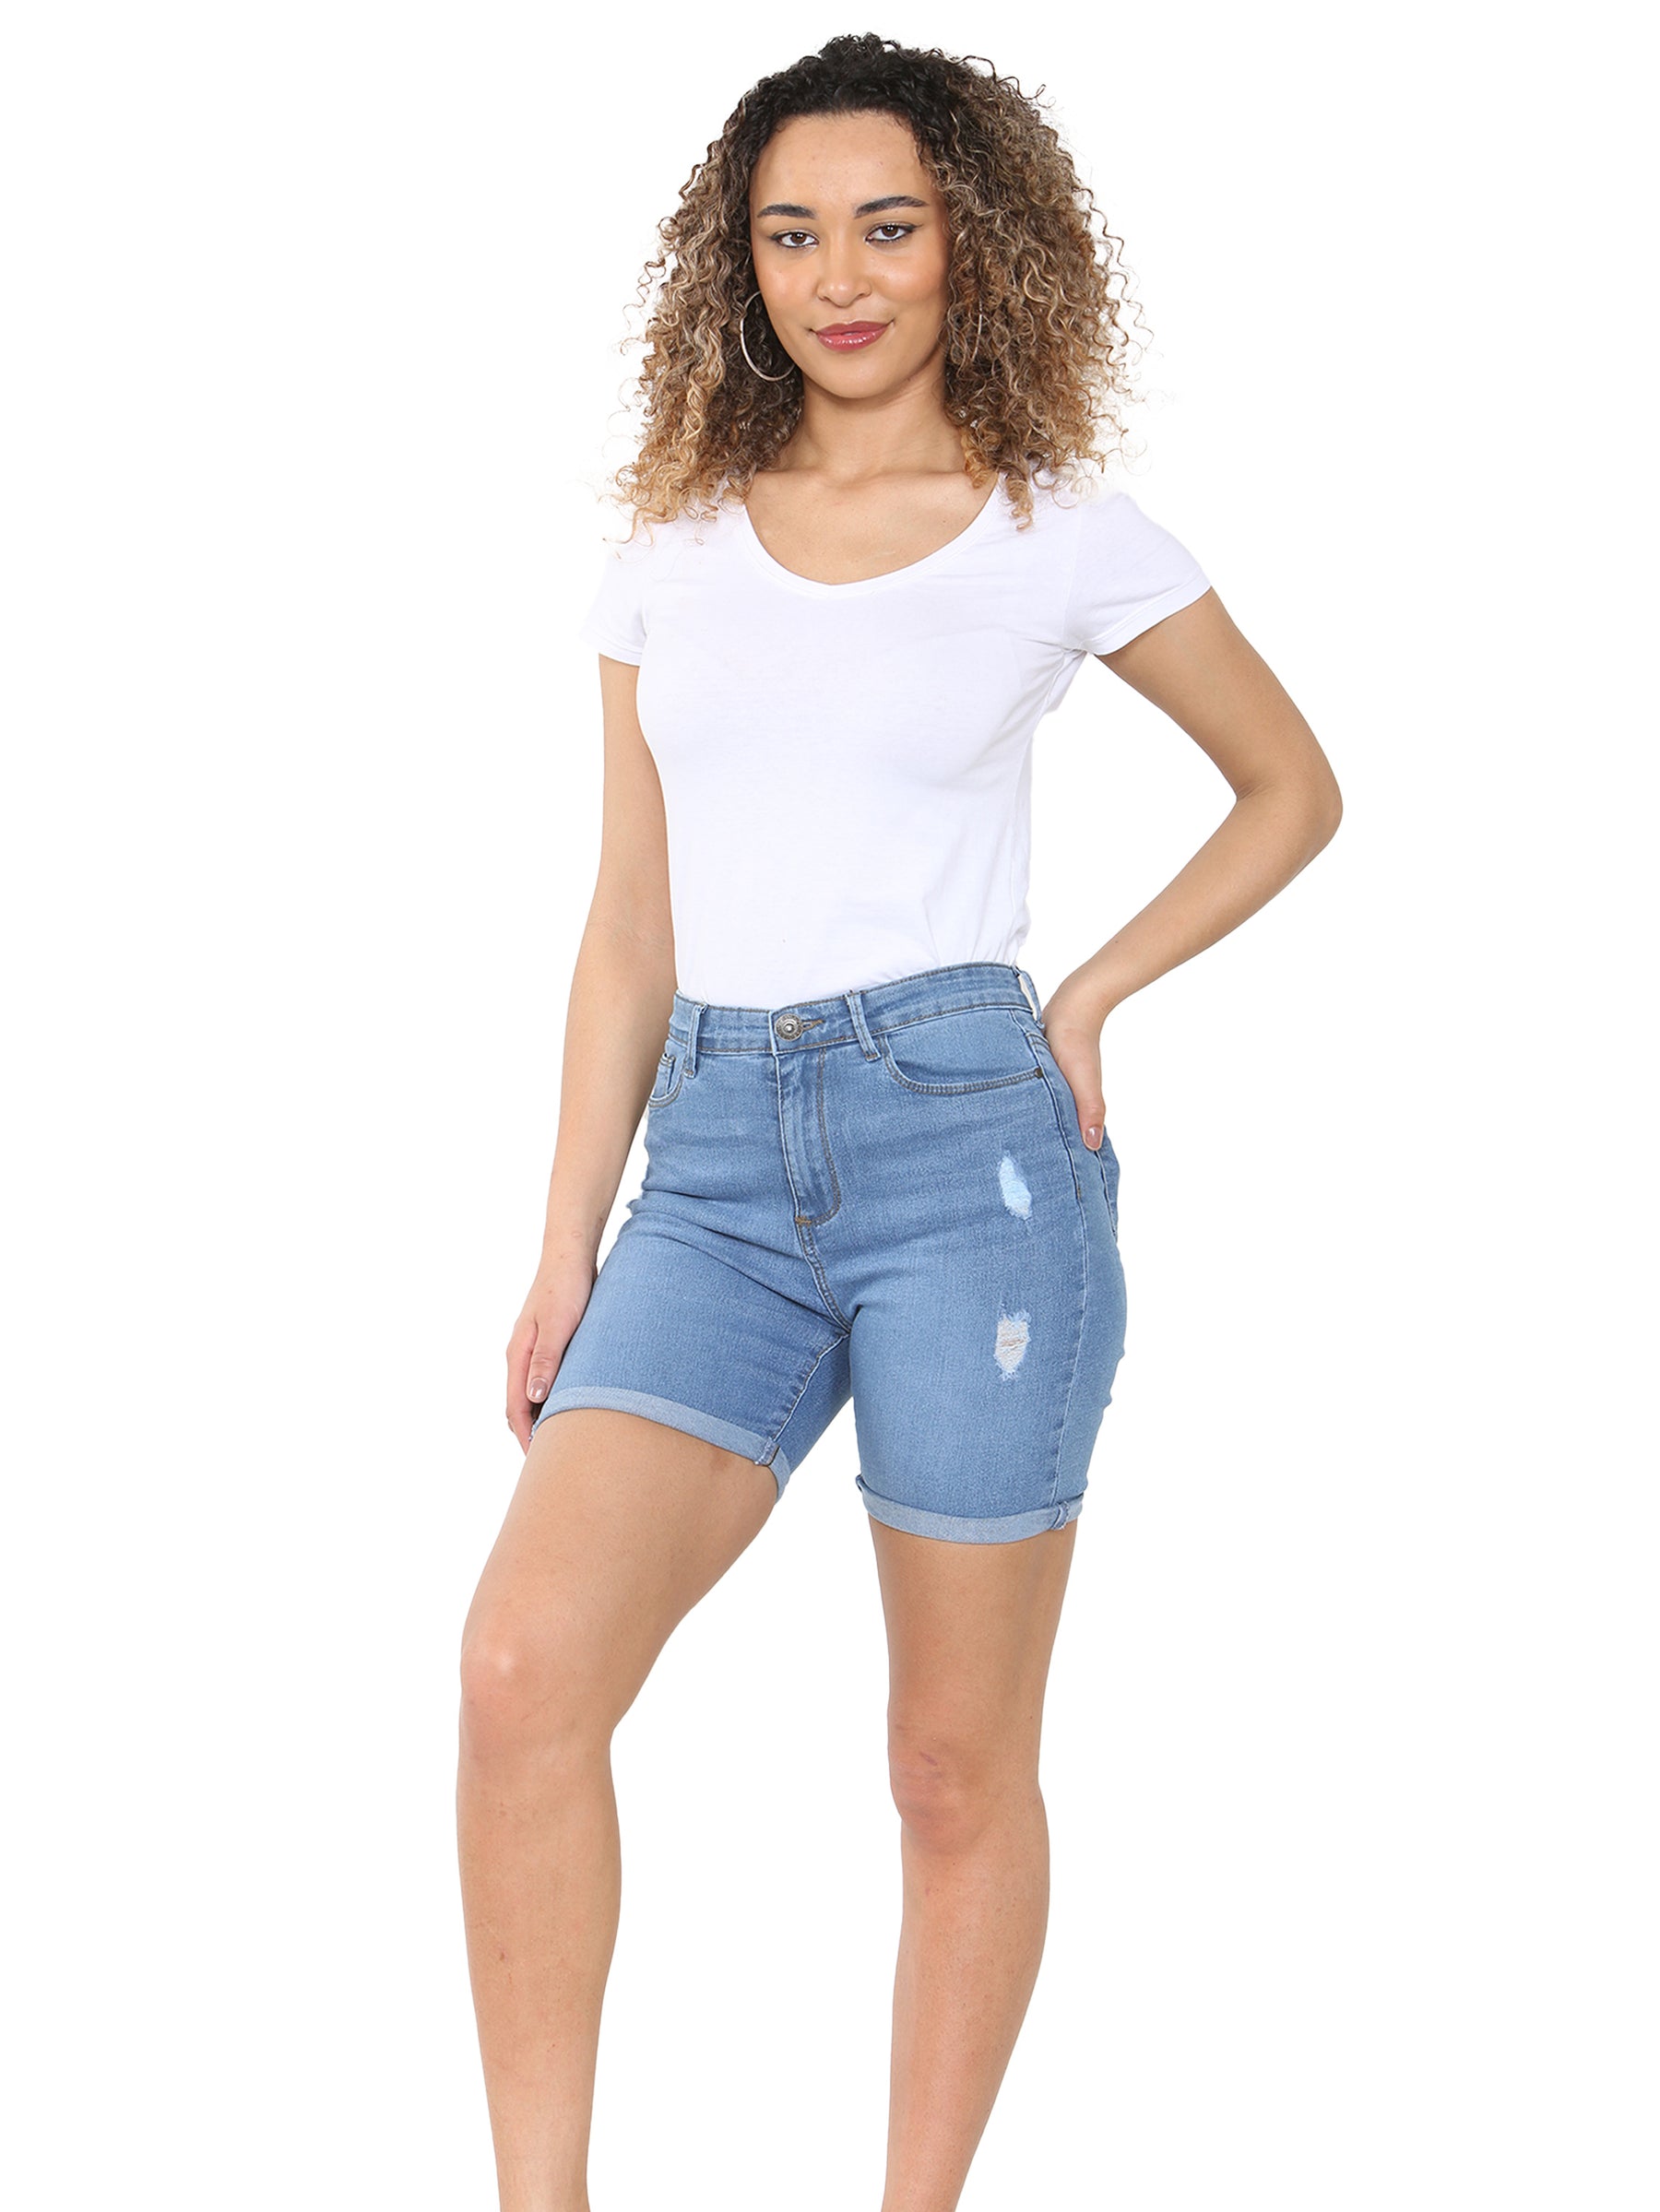 Jeans Shorts Women Ripped Short Jeans Women Fashion Short Jeans for Women  Ropa Para Mujer Ladies Denim Shorts Jean Shortsjean Shorts -  Australia